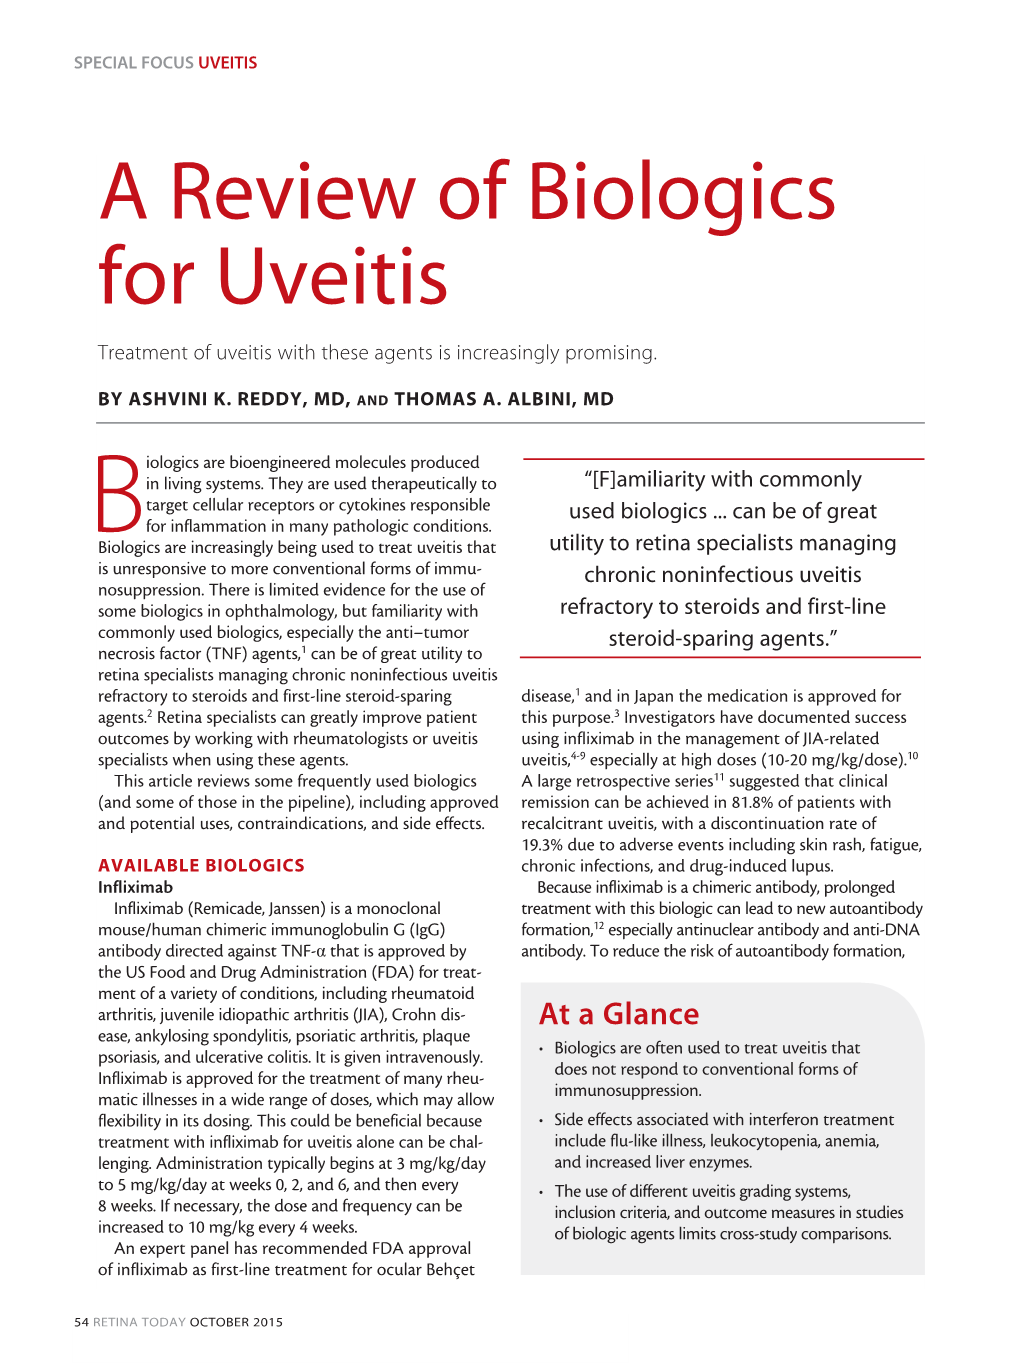 A Review of Biologics for Uveitis Treatment of Uveitis with These Agents Is Increasingly Promising